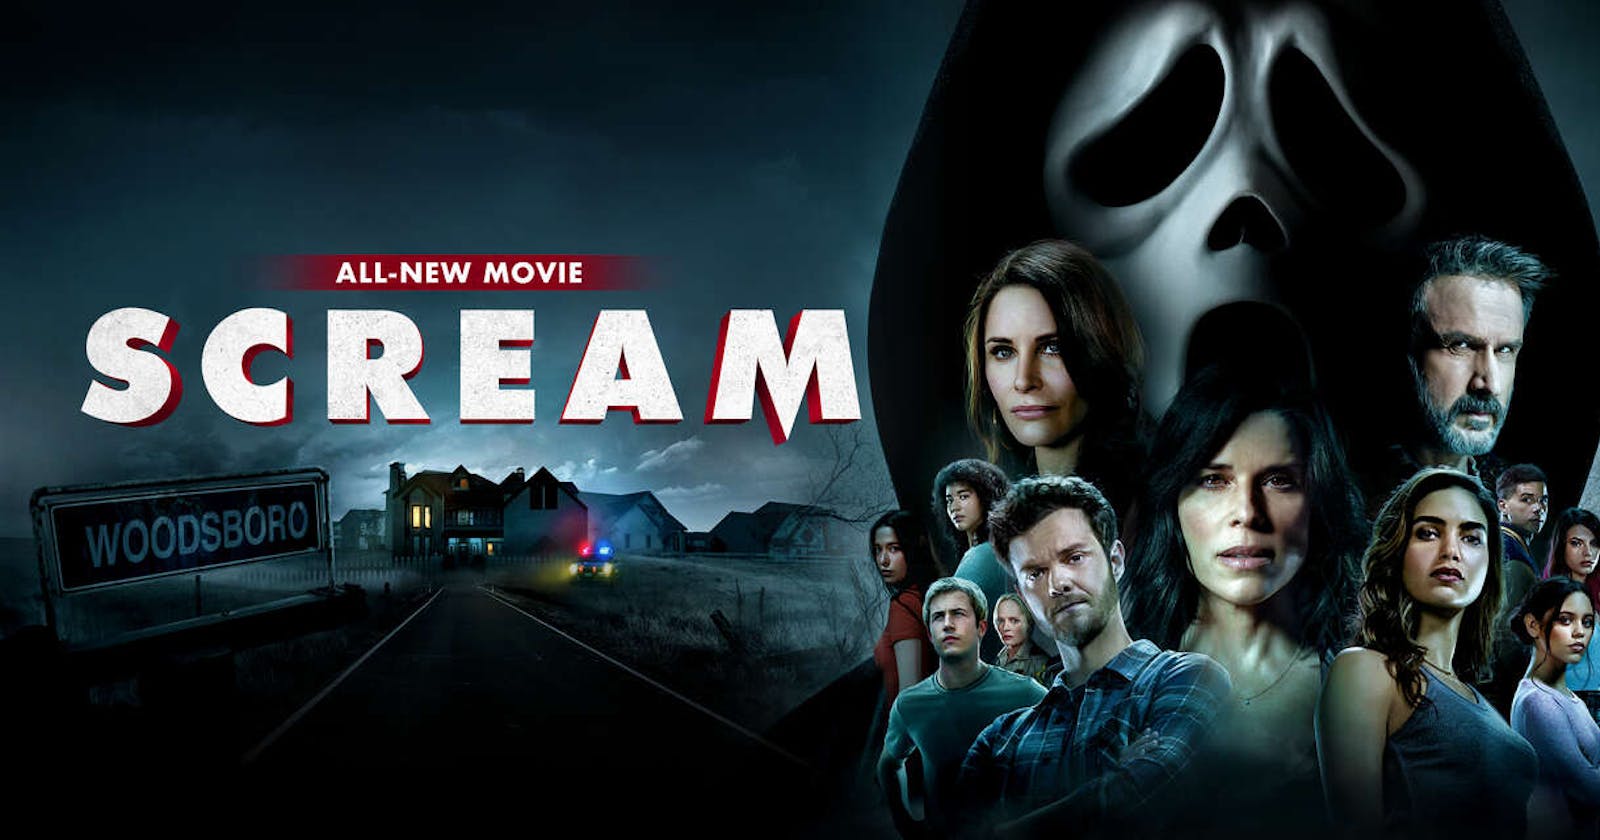 [.Watch.] U.s Scream VI (2023) FullMovie Online Streaming For Free at-Home